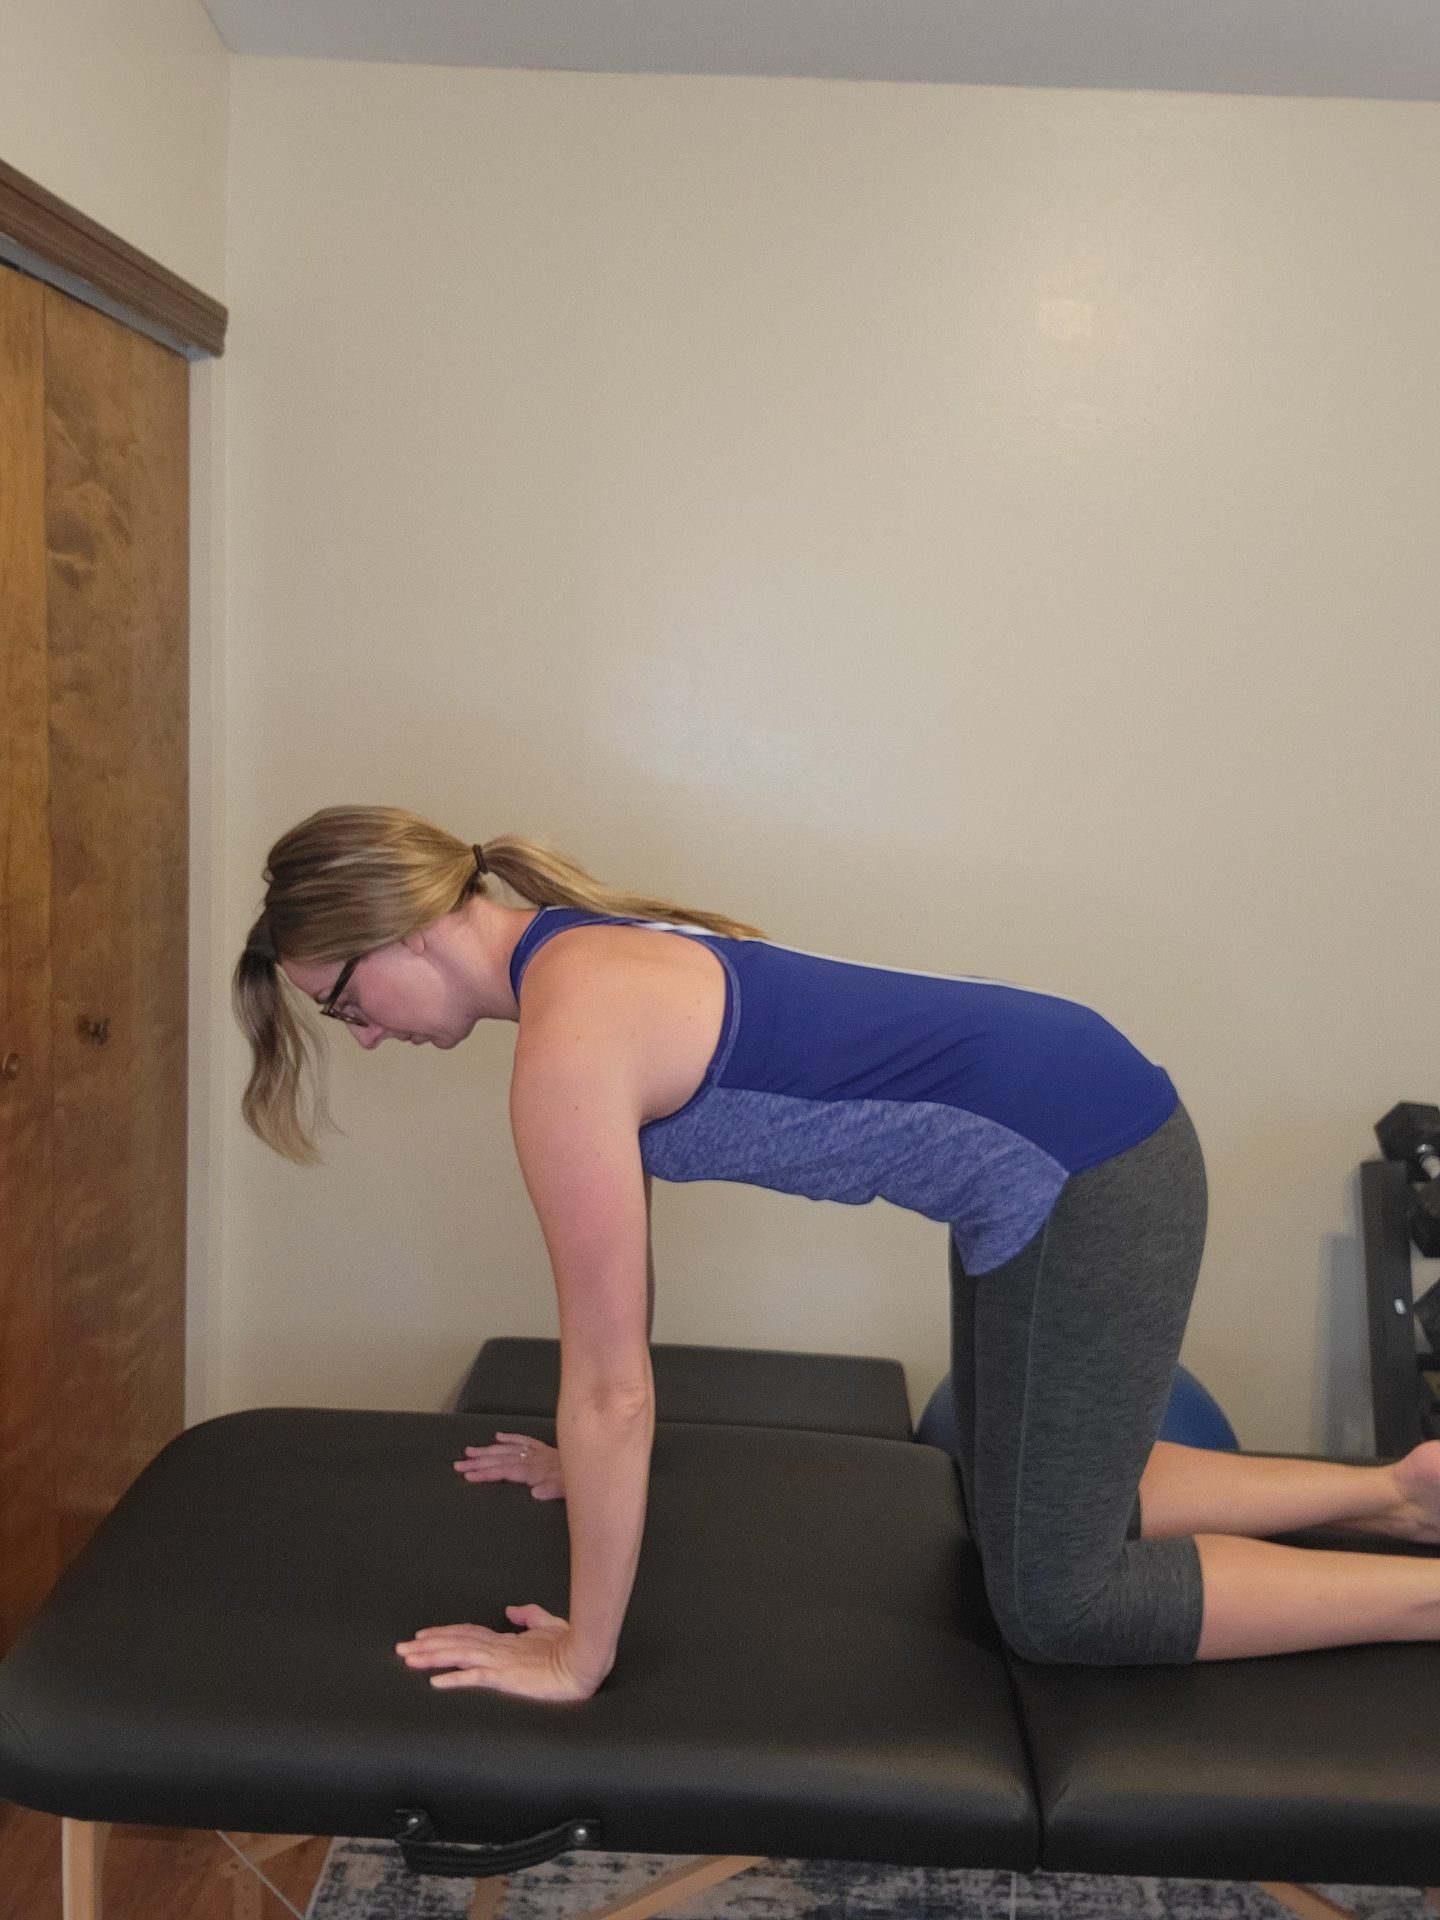 Star Exercise of the Week: Quadruped Alternating Arm Lift